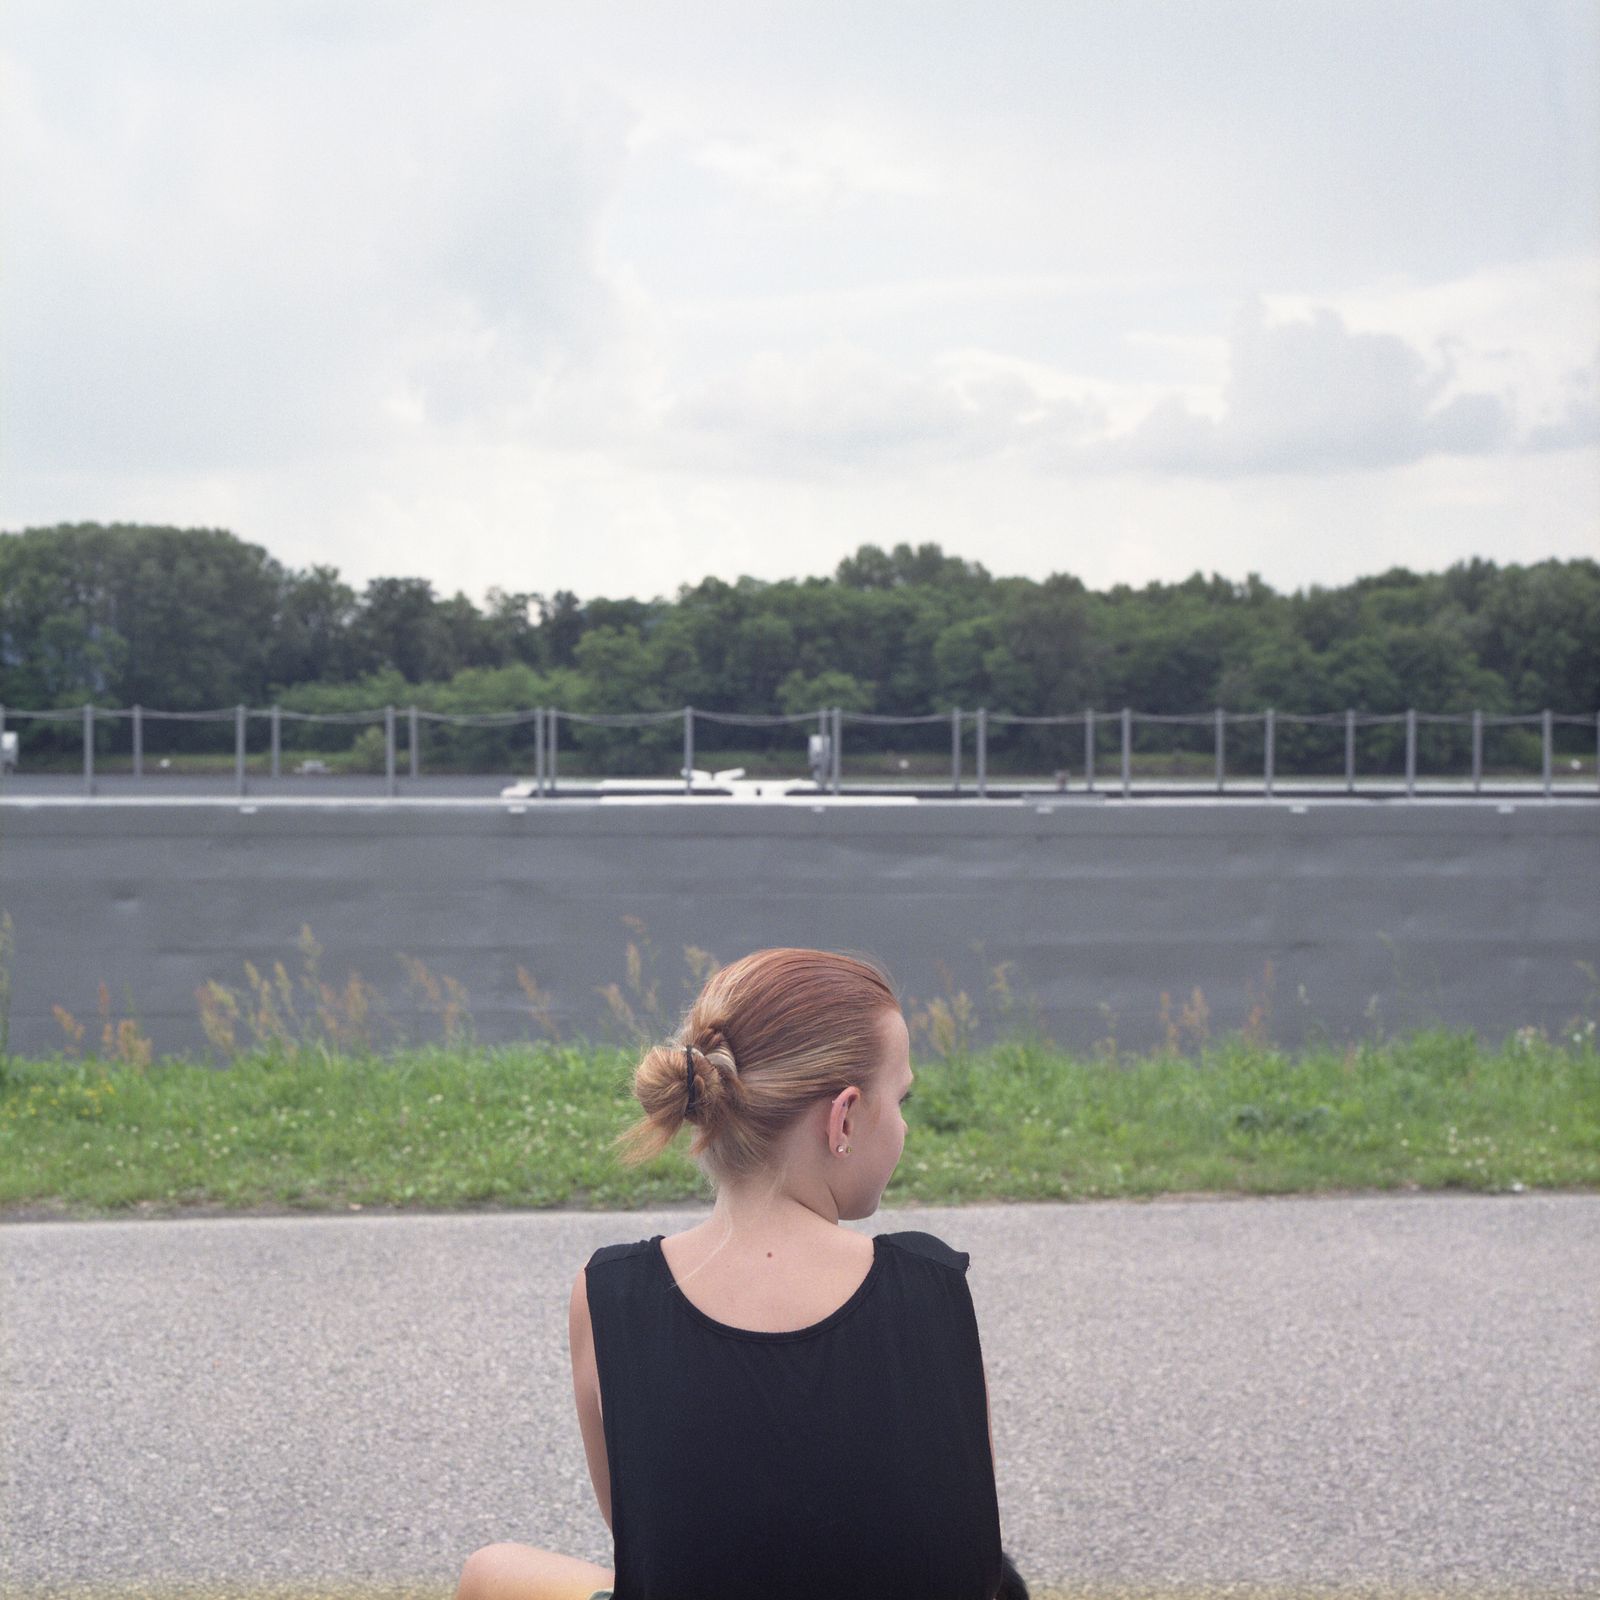 © Chiara Fossati - Maria, 16 years old, looking at the Danube river. Germany.